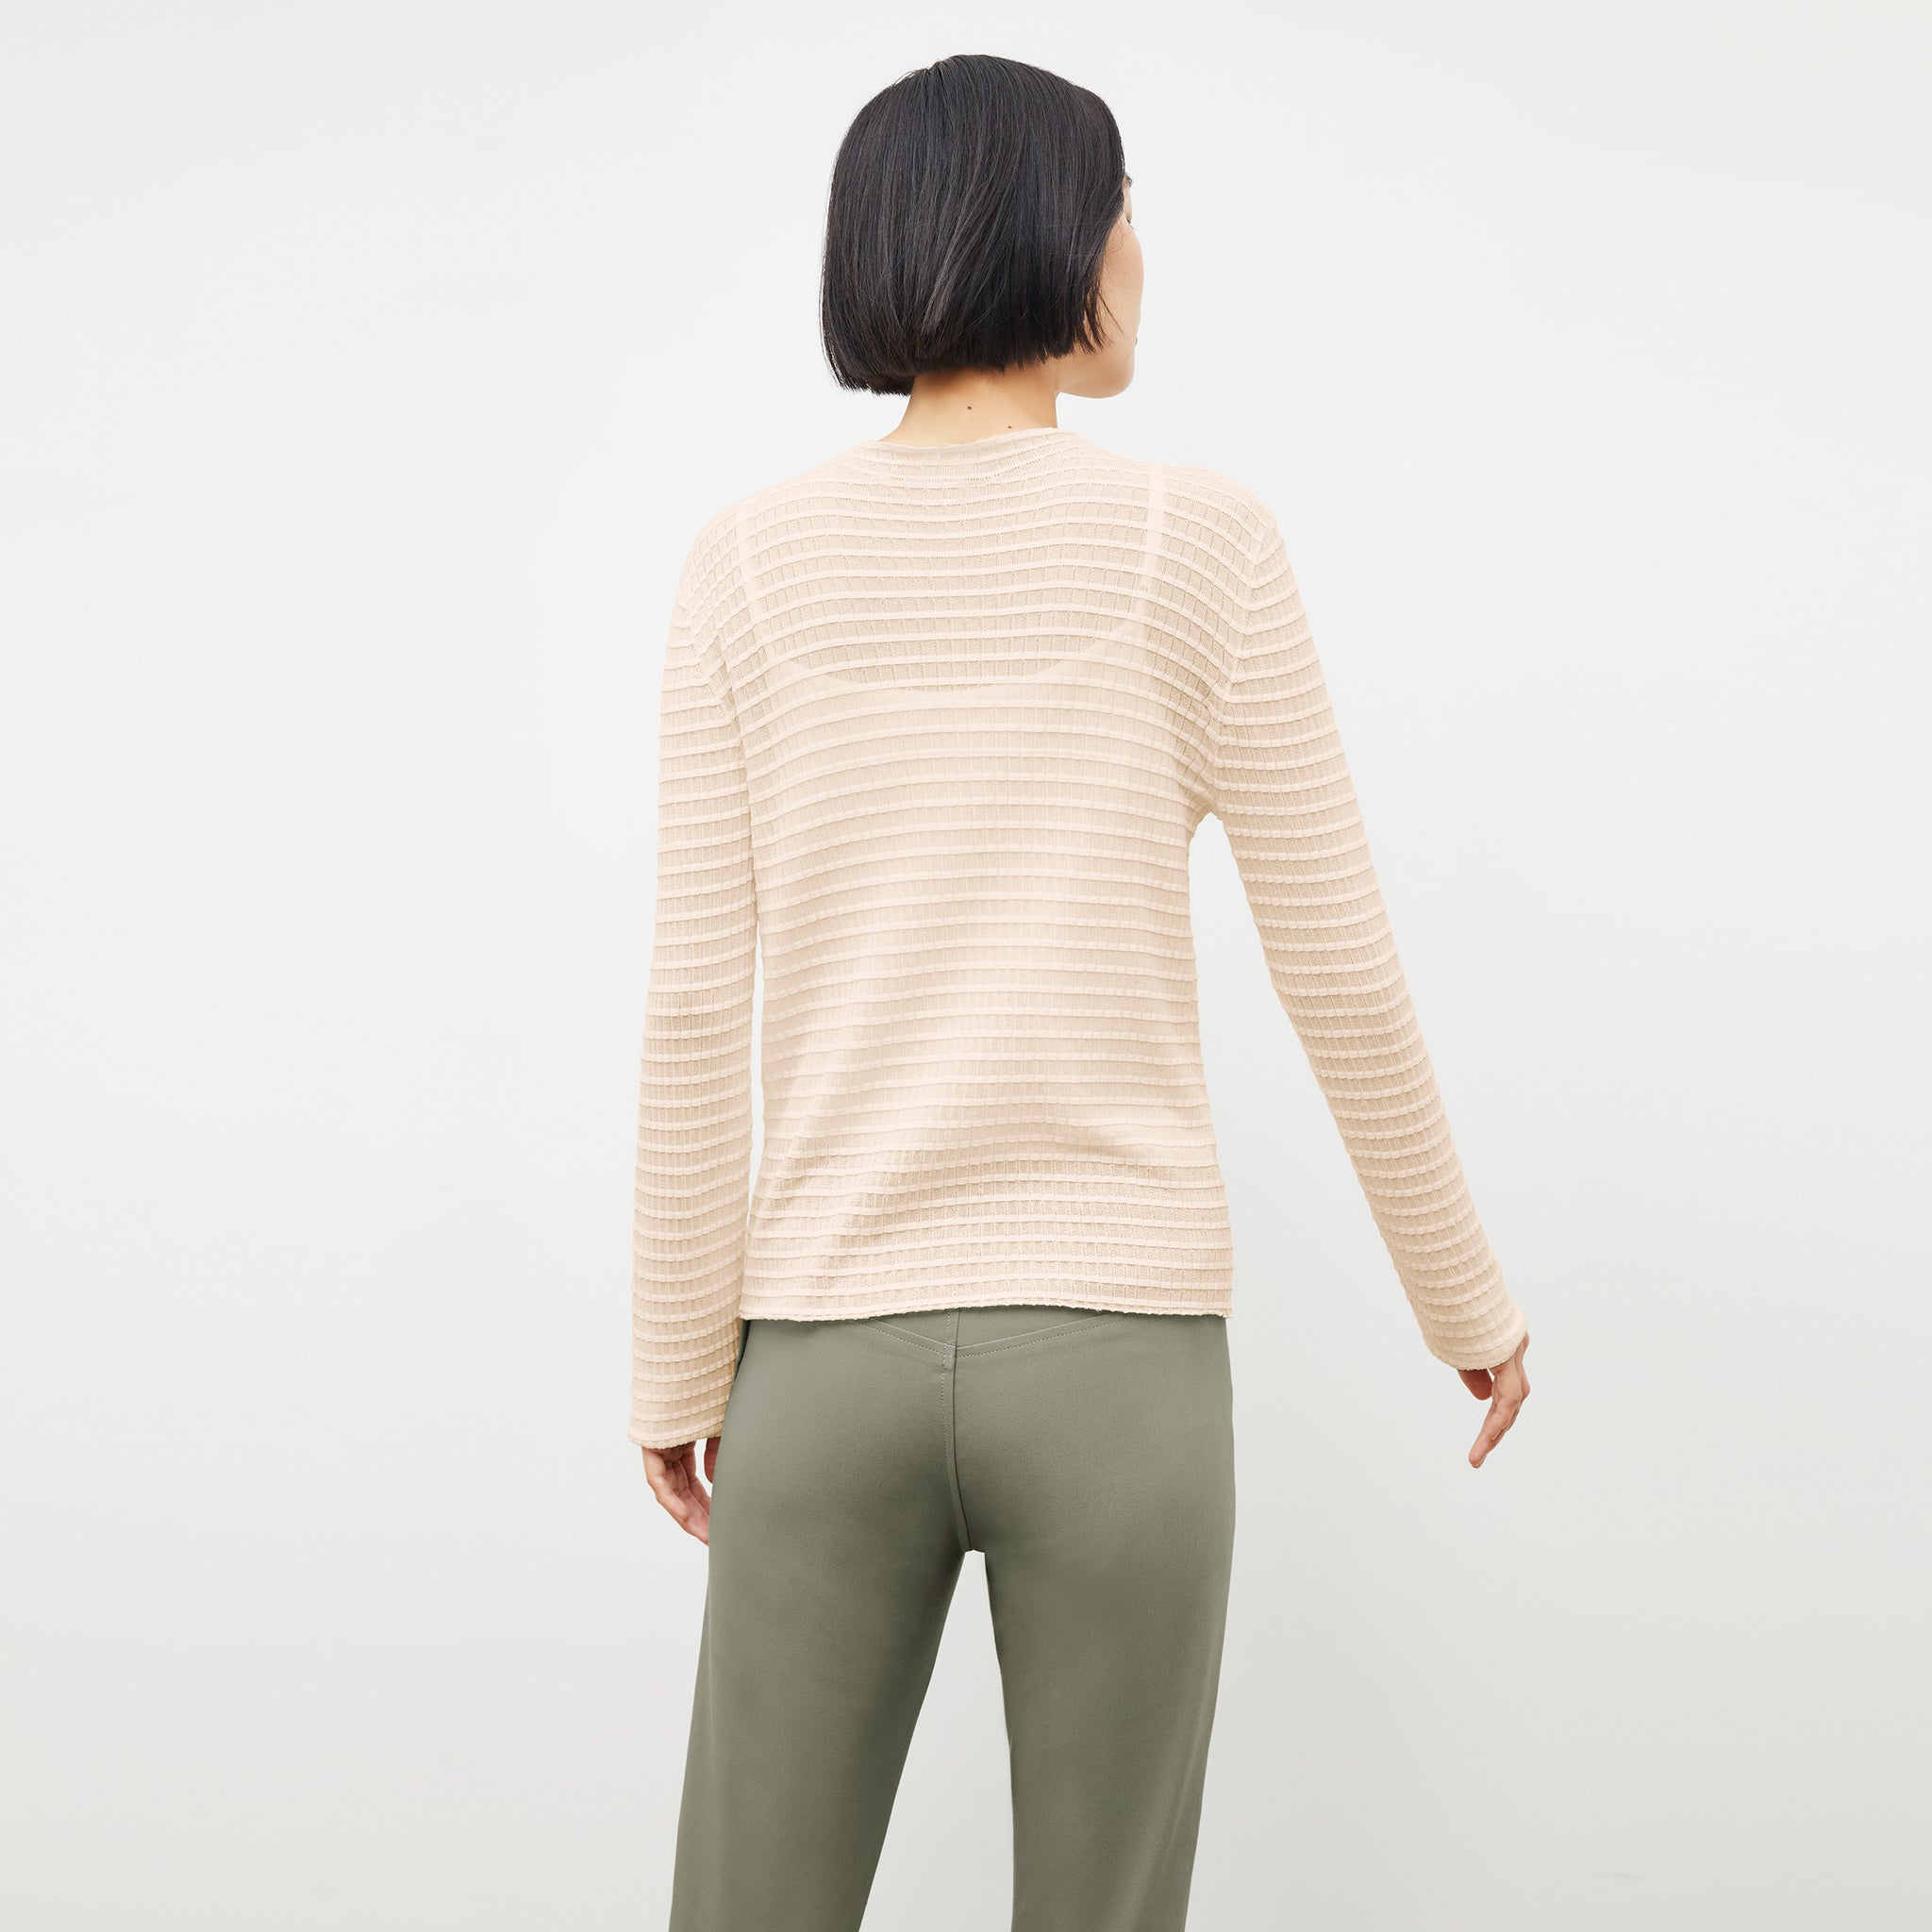 Back image of a woman standing wearing the Emerson Cardigan in Meringue